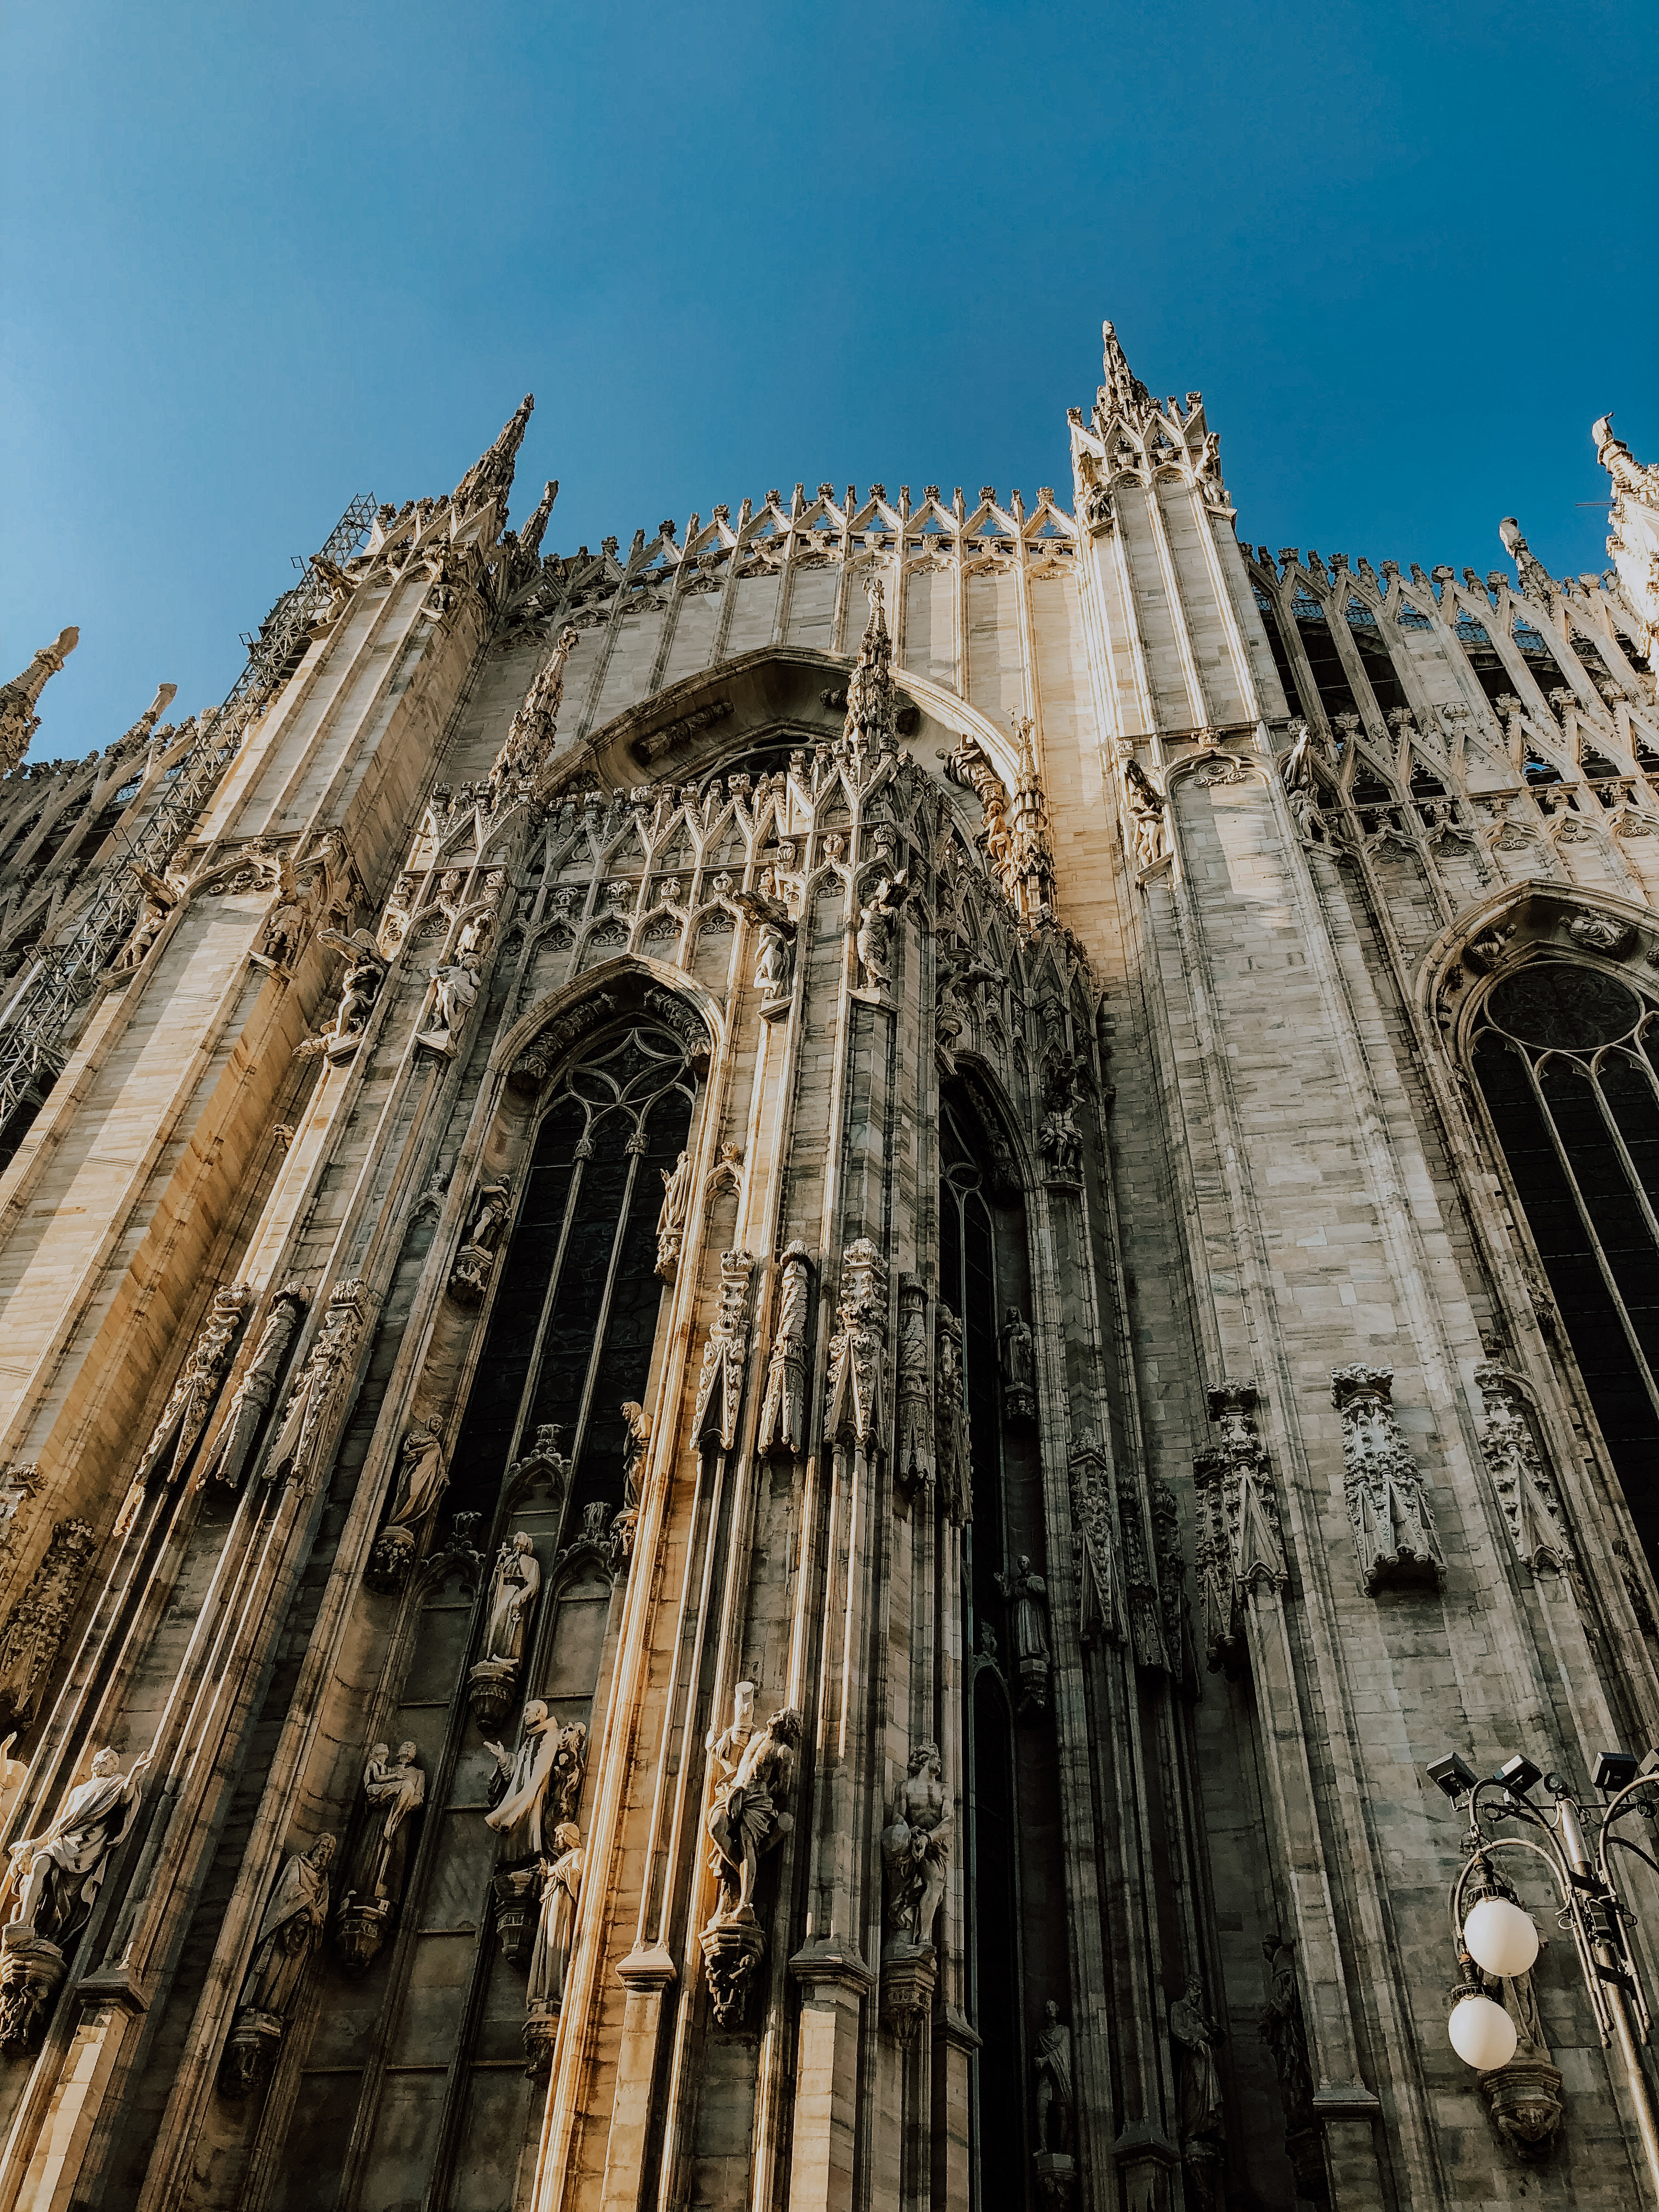 Up close shot of the intricate architecture of Duomo di Milano